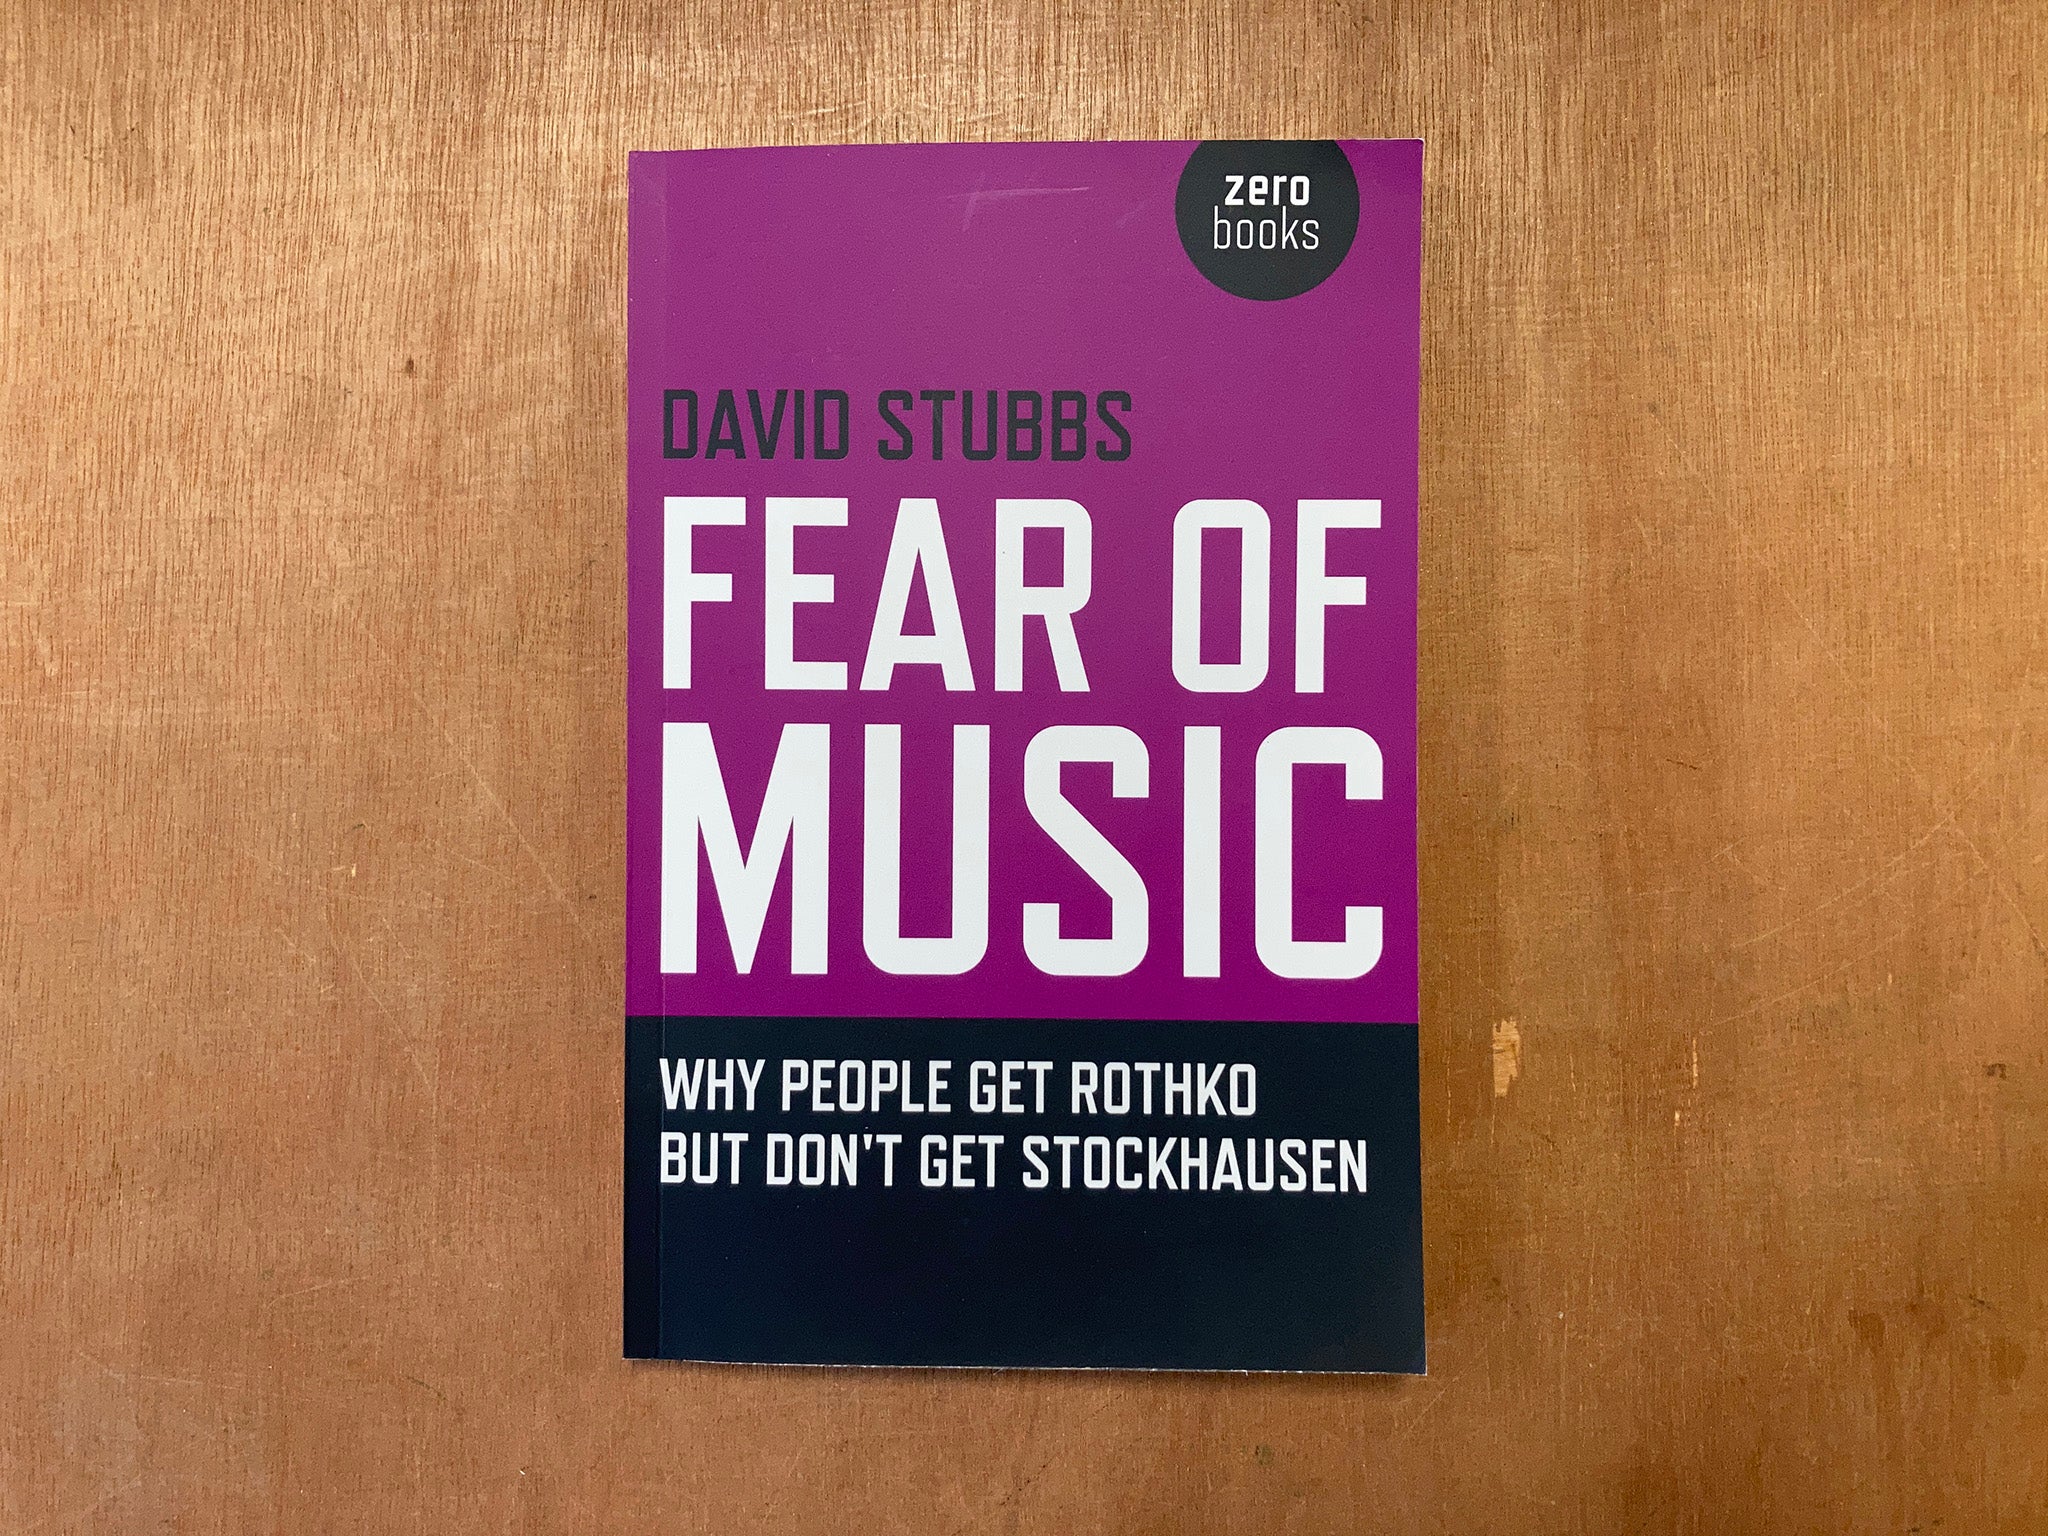 FEAR OF MUSIC by David Stubbs